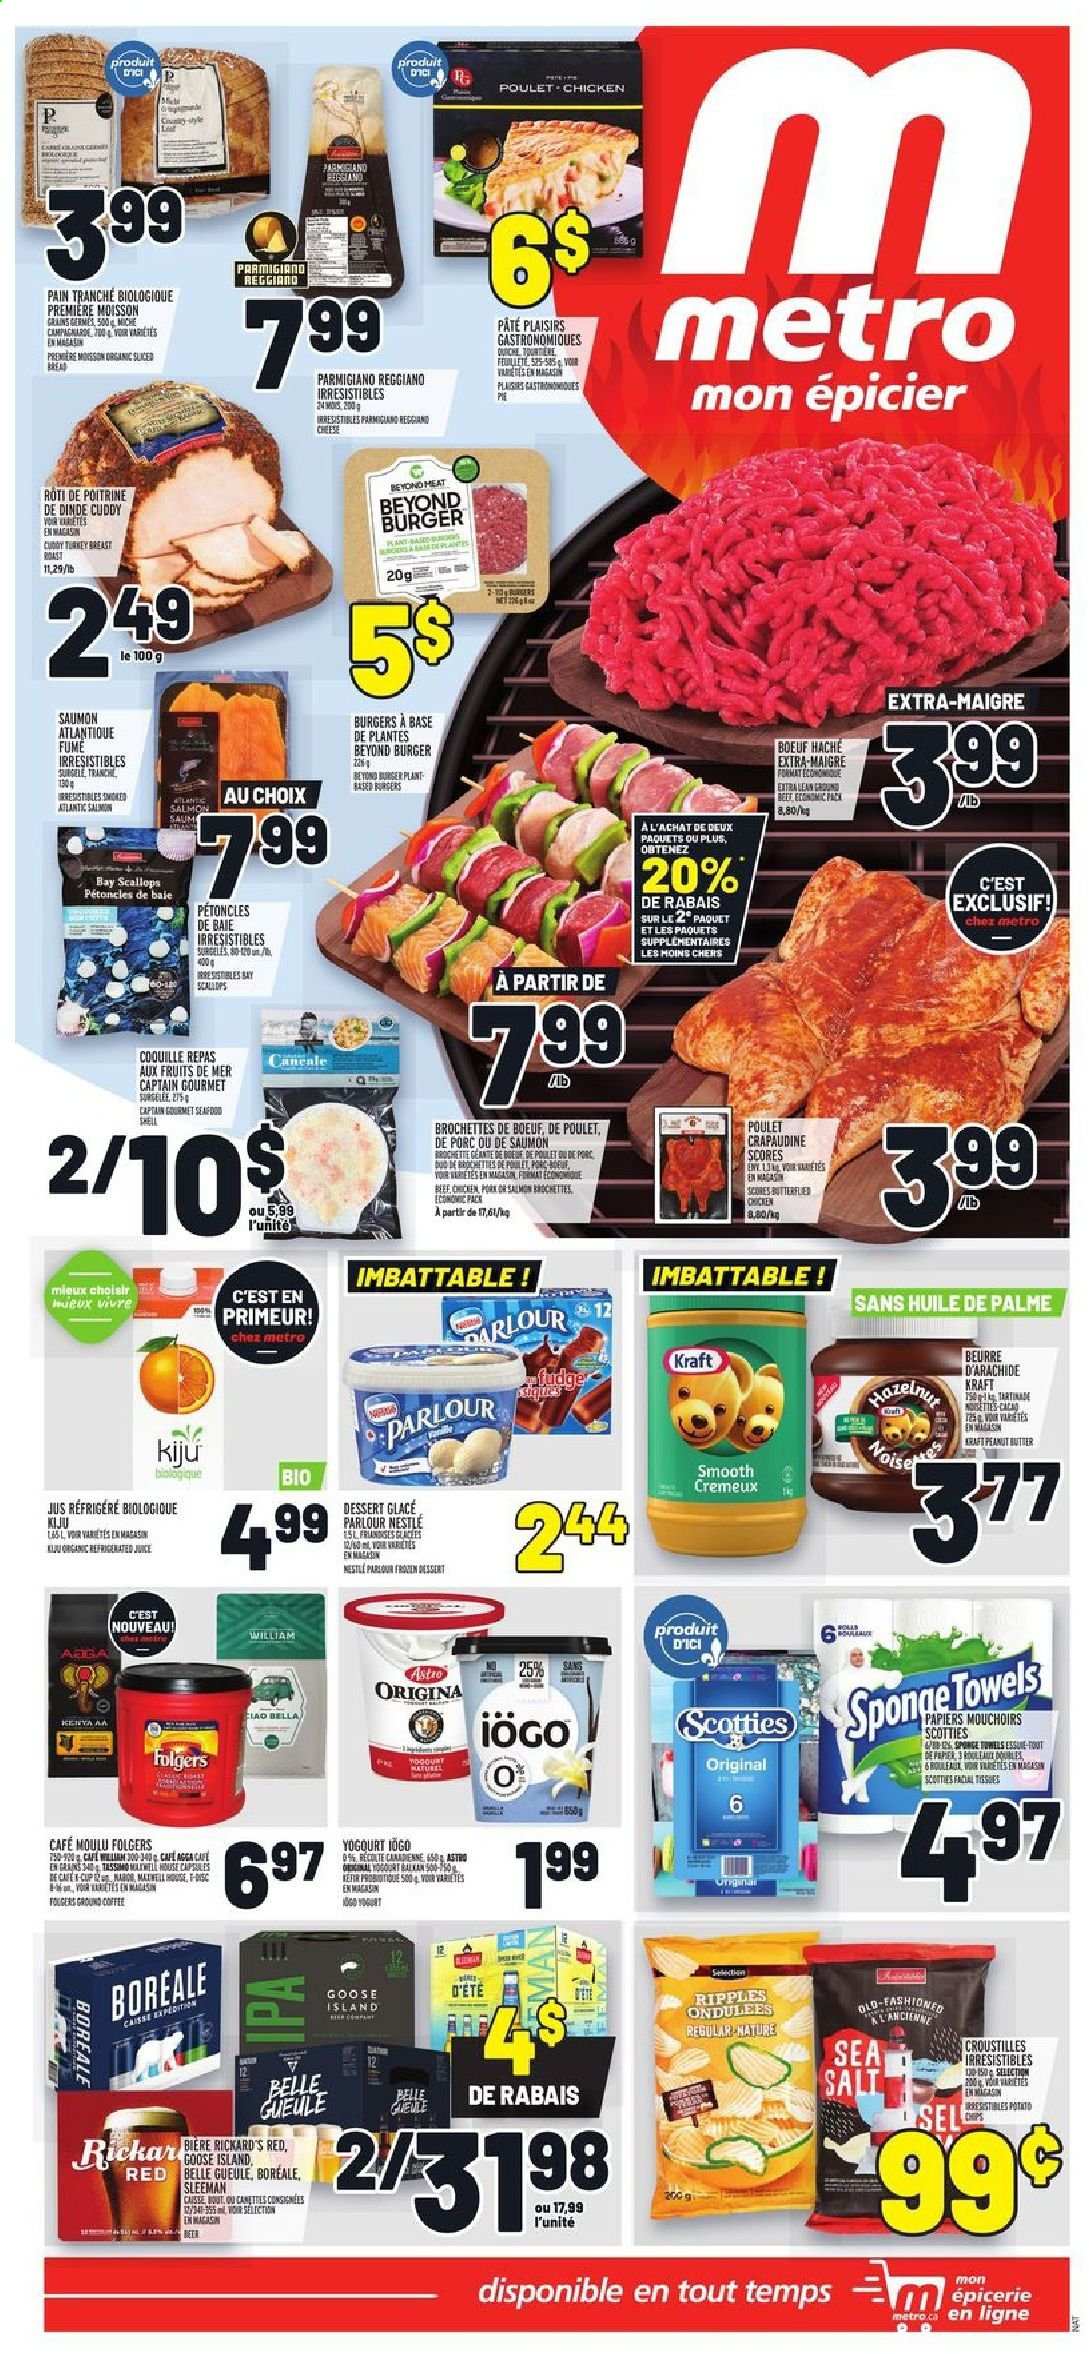 thumbnail - Metro Flyer - August 05, 2021 - August 11, 2021 - Sales products - pie, Bella, salmon, scallops, seafood, hamburger, Kraft®, cheese, Parmigiano Reggiano, quiche, fudge, juice, coffee, Folgers, ground coffee, beer, IPA, sponge, cup, towel, PREMIERE, Nestlé, chips. Page 1.